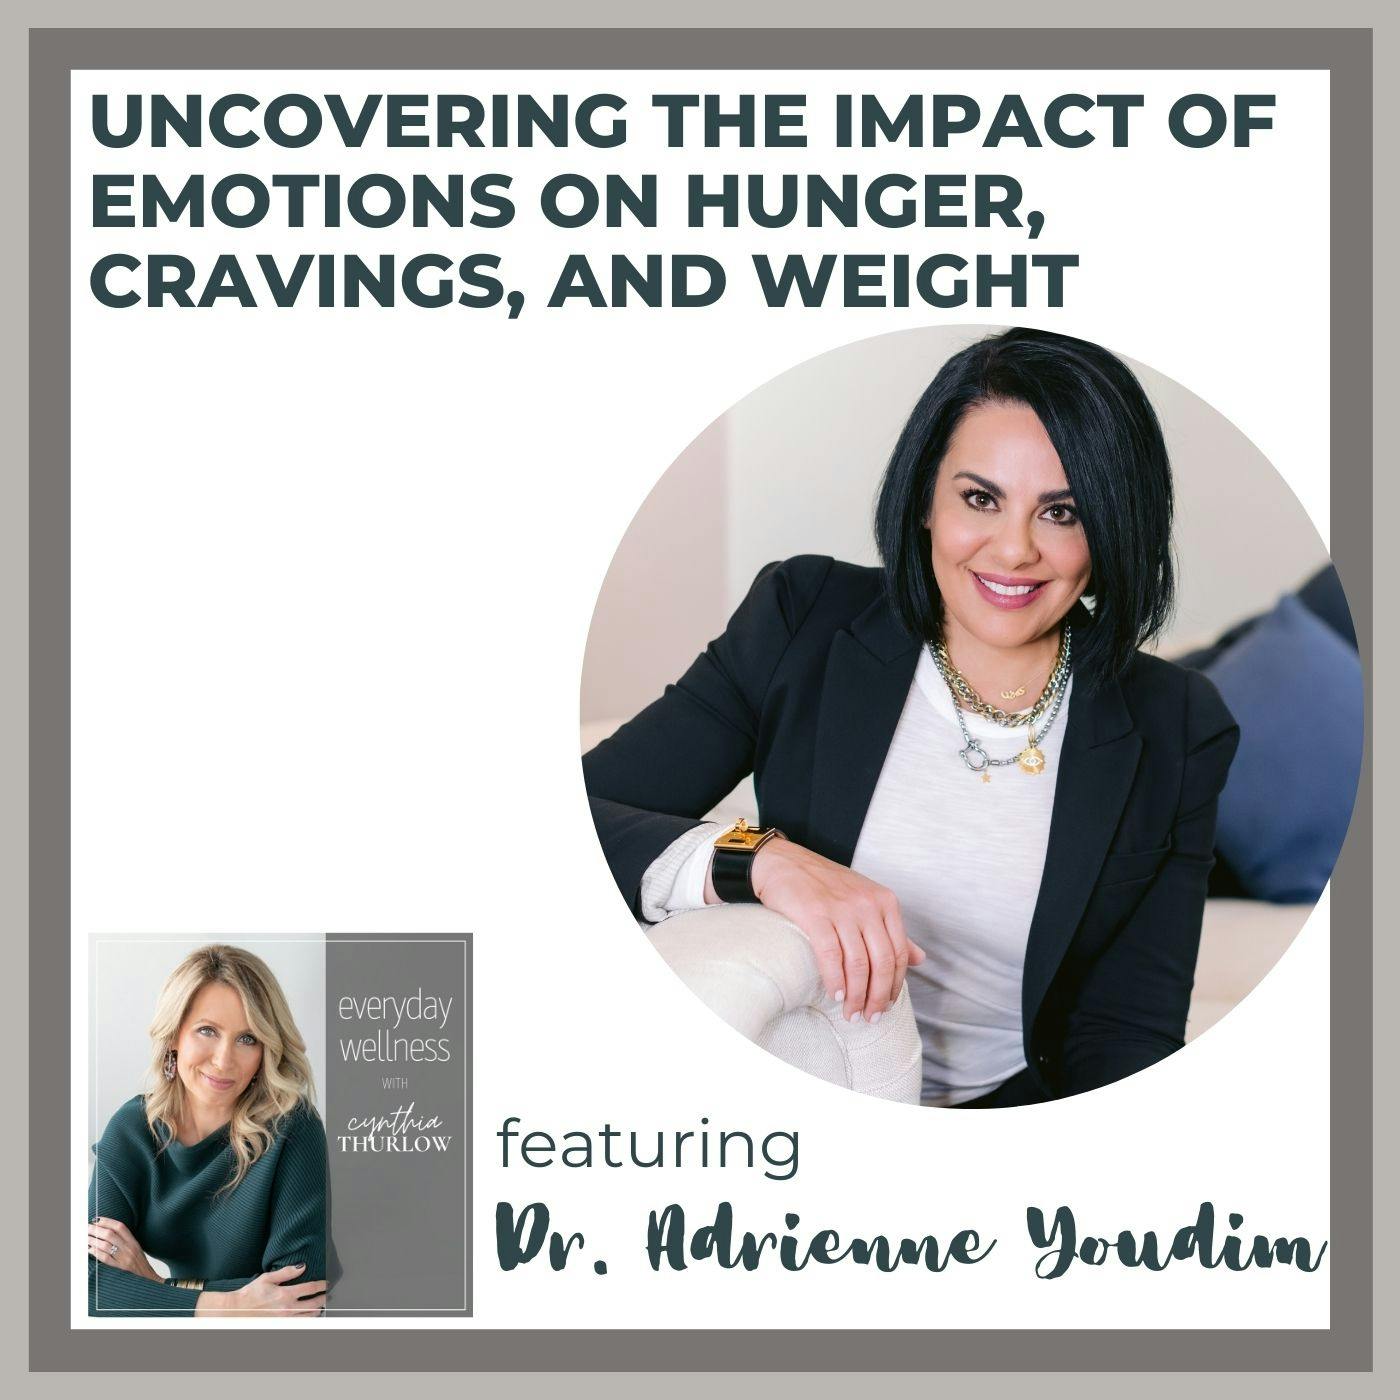 Ep. 182 Uncovering the Impact of Emotions on Hunger, Cravings, and Weight with Dr. Adrienne Youdim